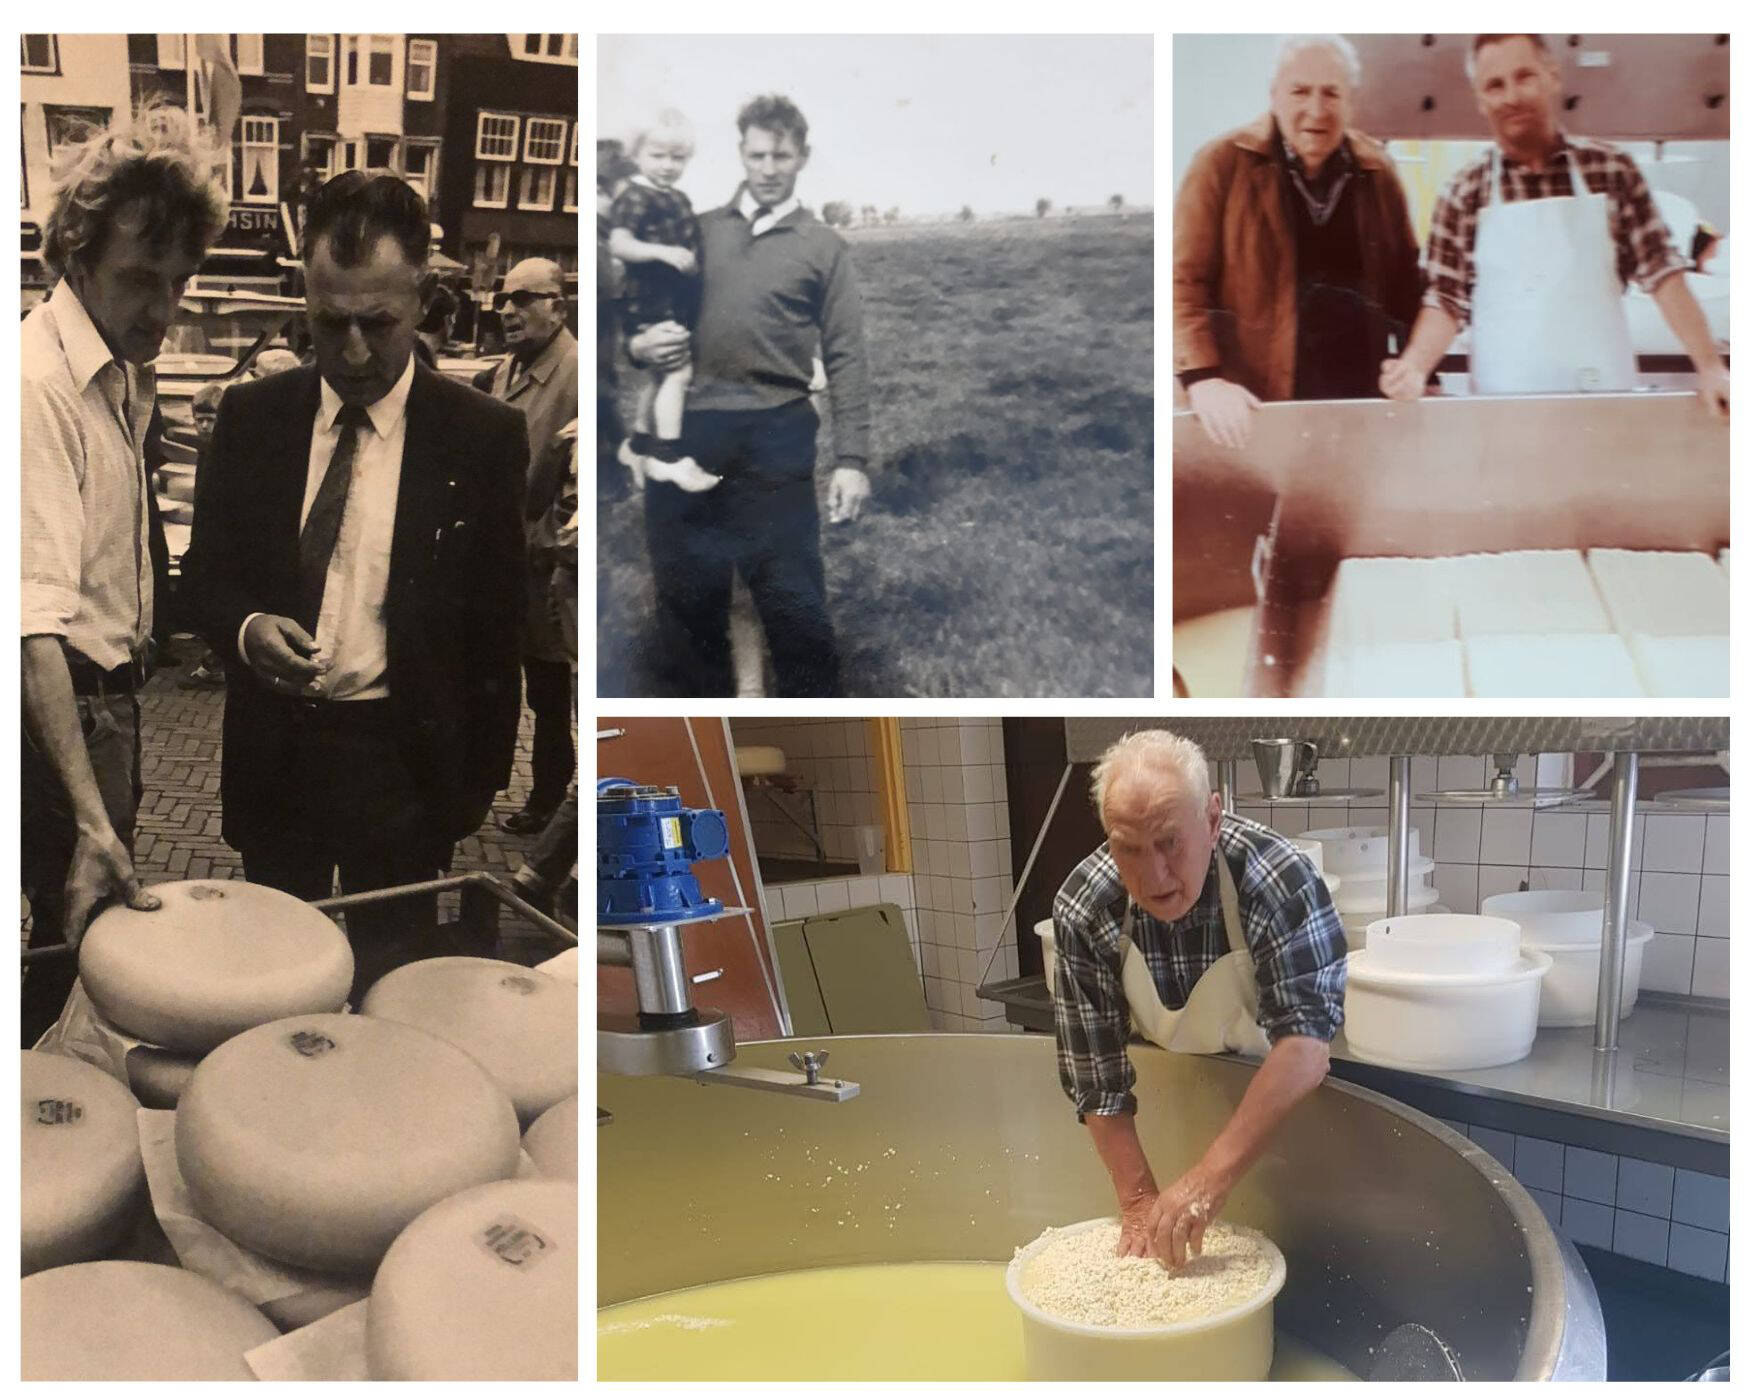 For six generations, the Snoek family has made Gouda in the Gouda region of Hollands cheese valley.